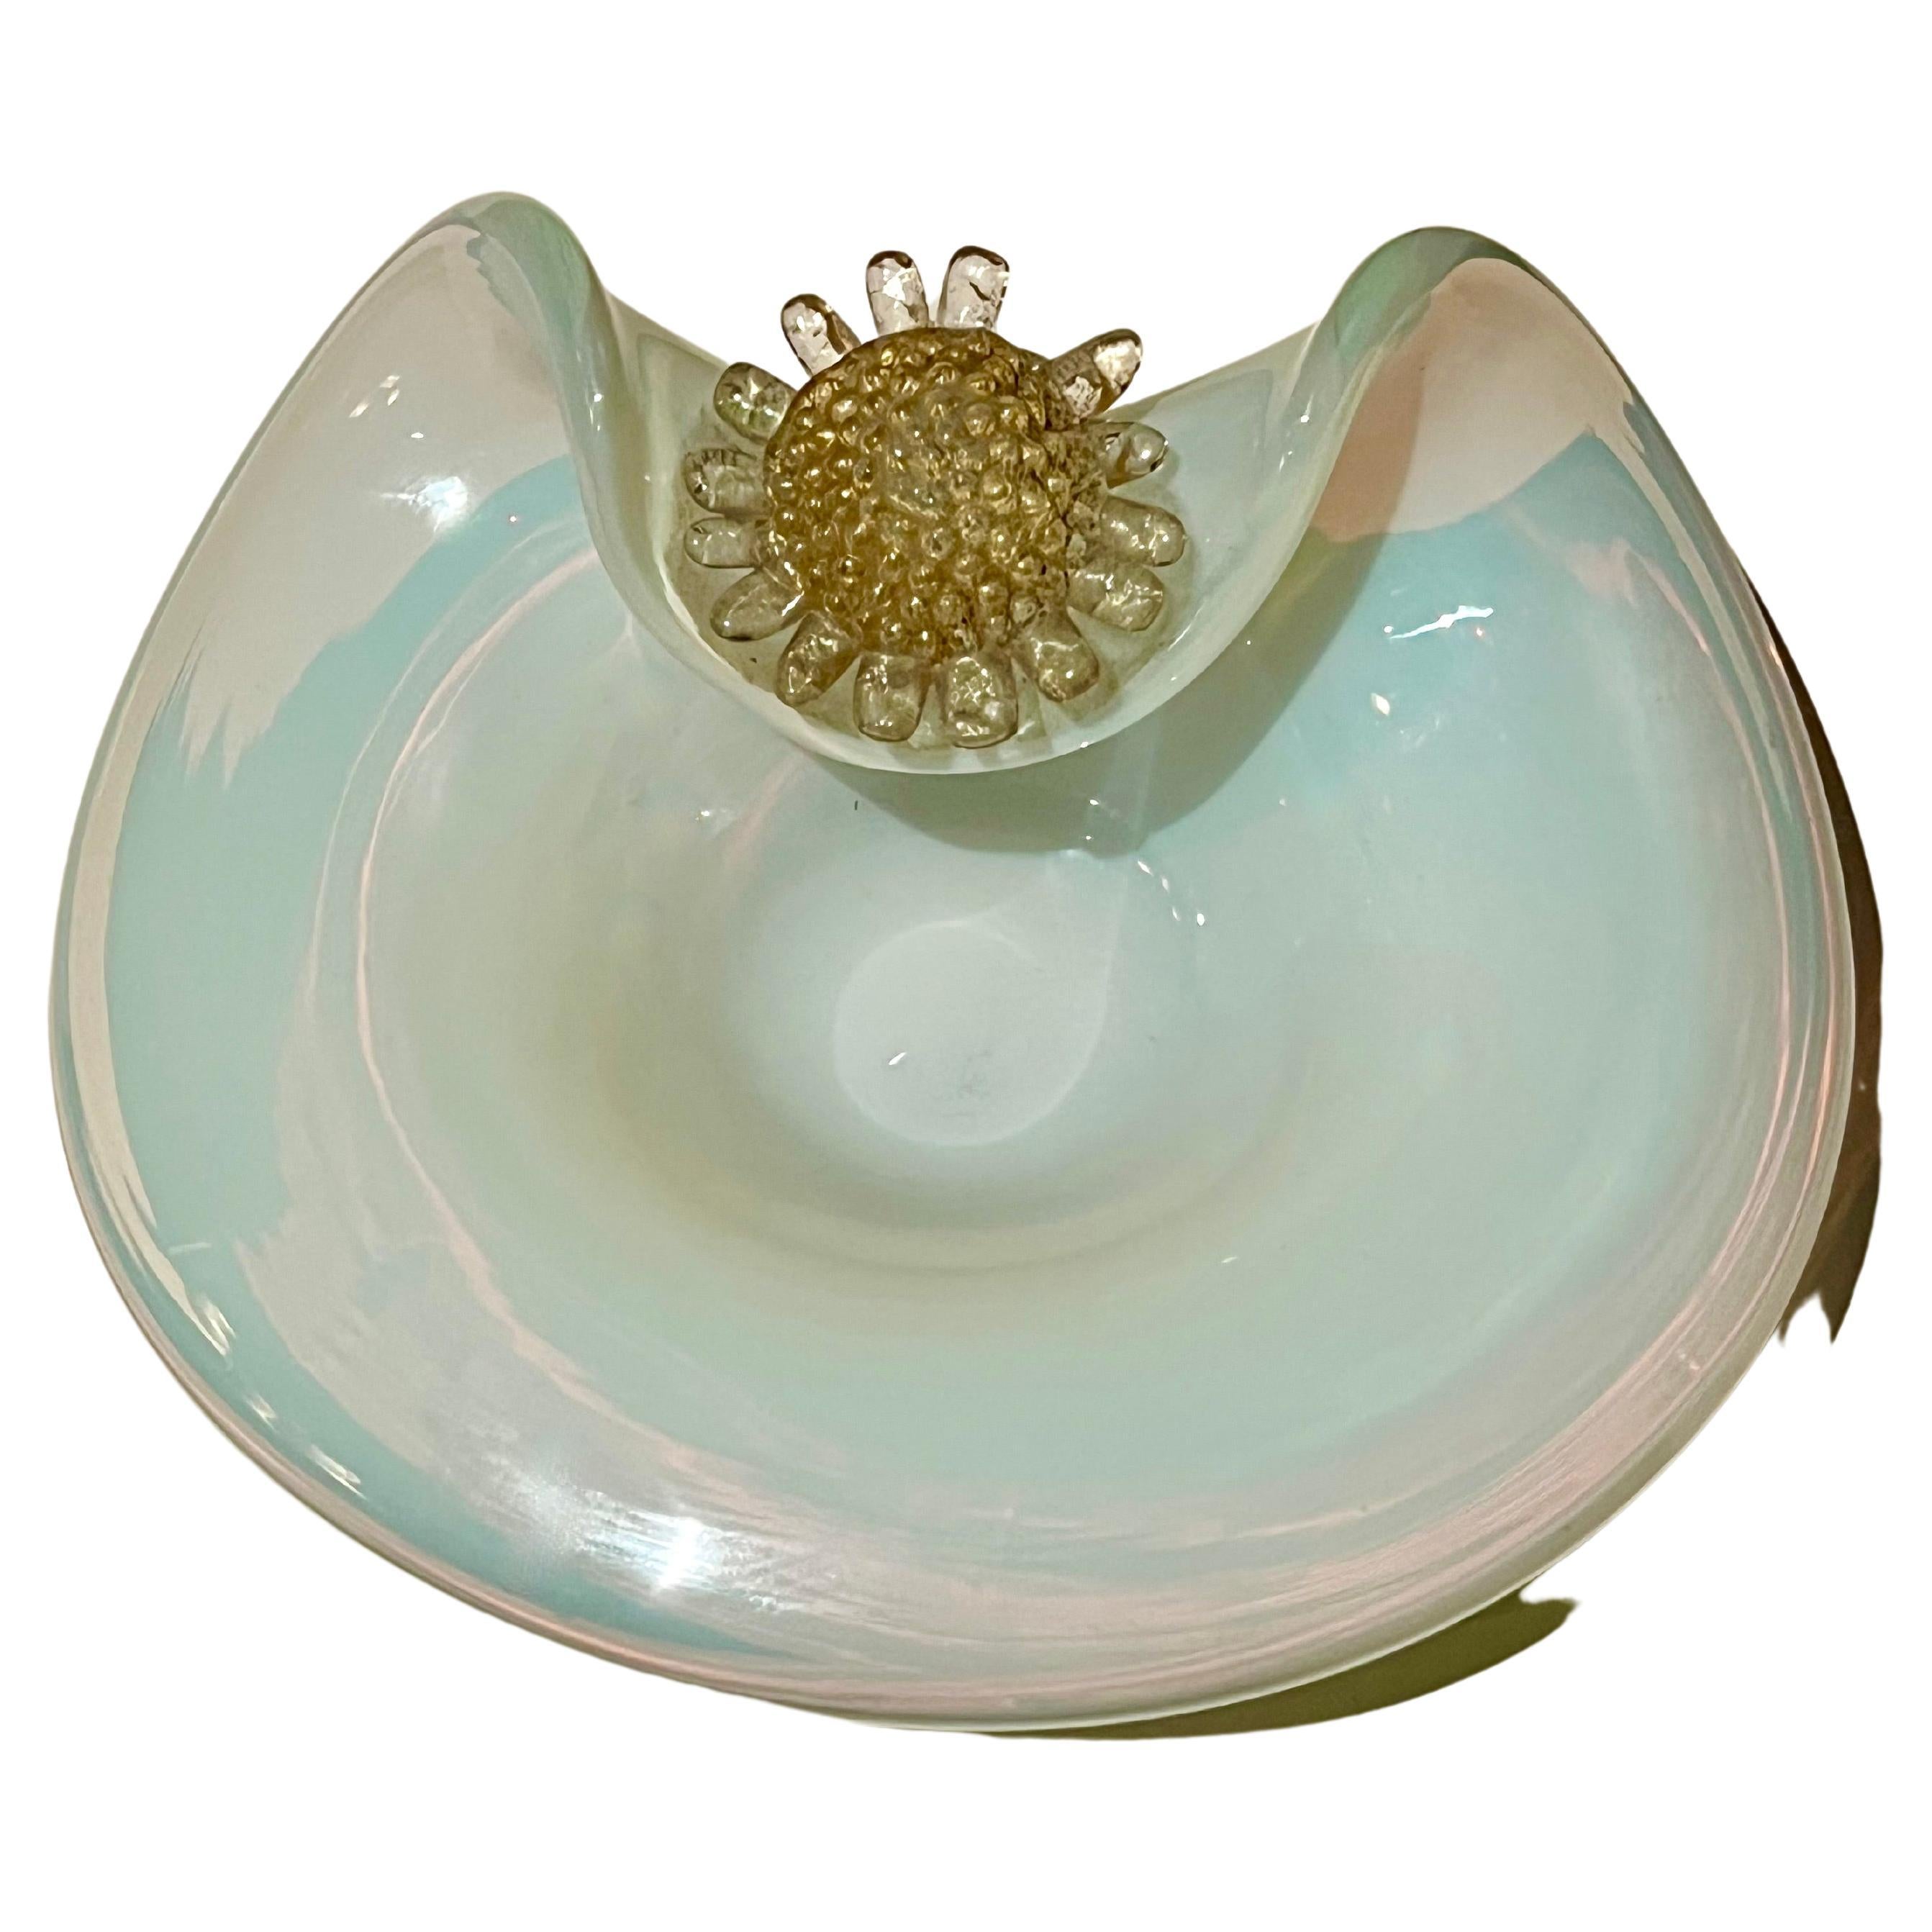 This is by far the most beautiful Murano dish we have sold. the opaline and gold detail far surpass anything we have had, ever... this is a wonderful decorative piece or could be a compliment to a desk or work station... it is utterly stunning.